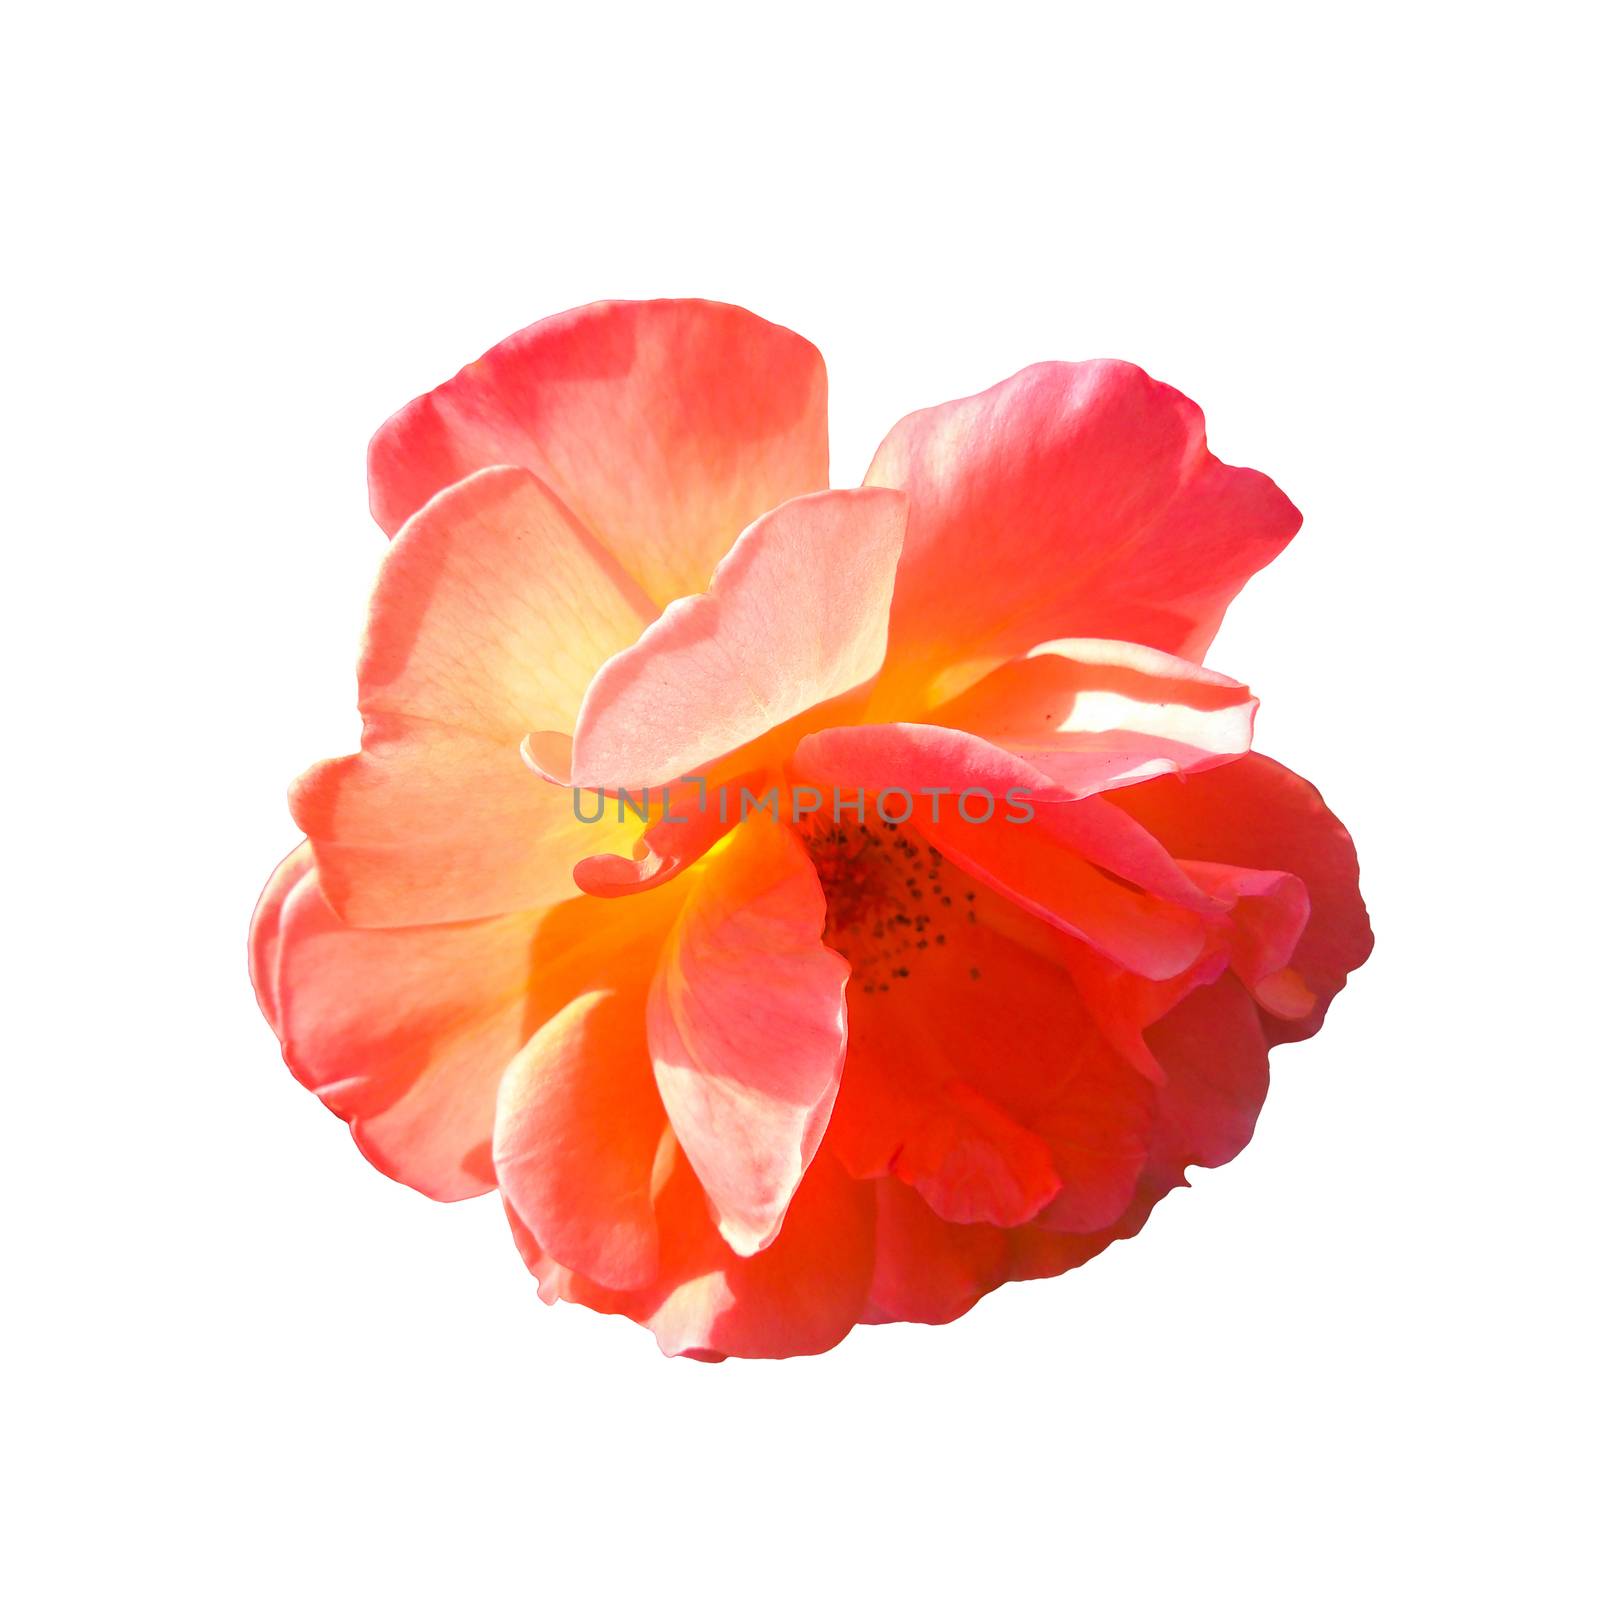 Isolated photo of garden rose flower on a white background in hard light from behind from above by LanaLeta